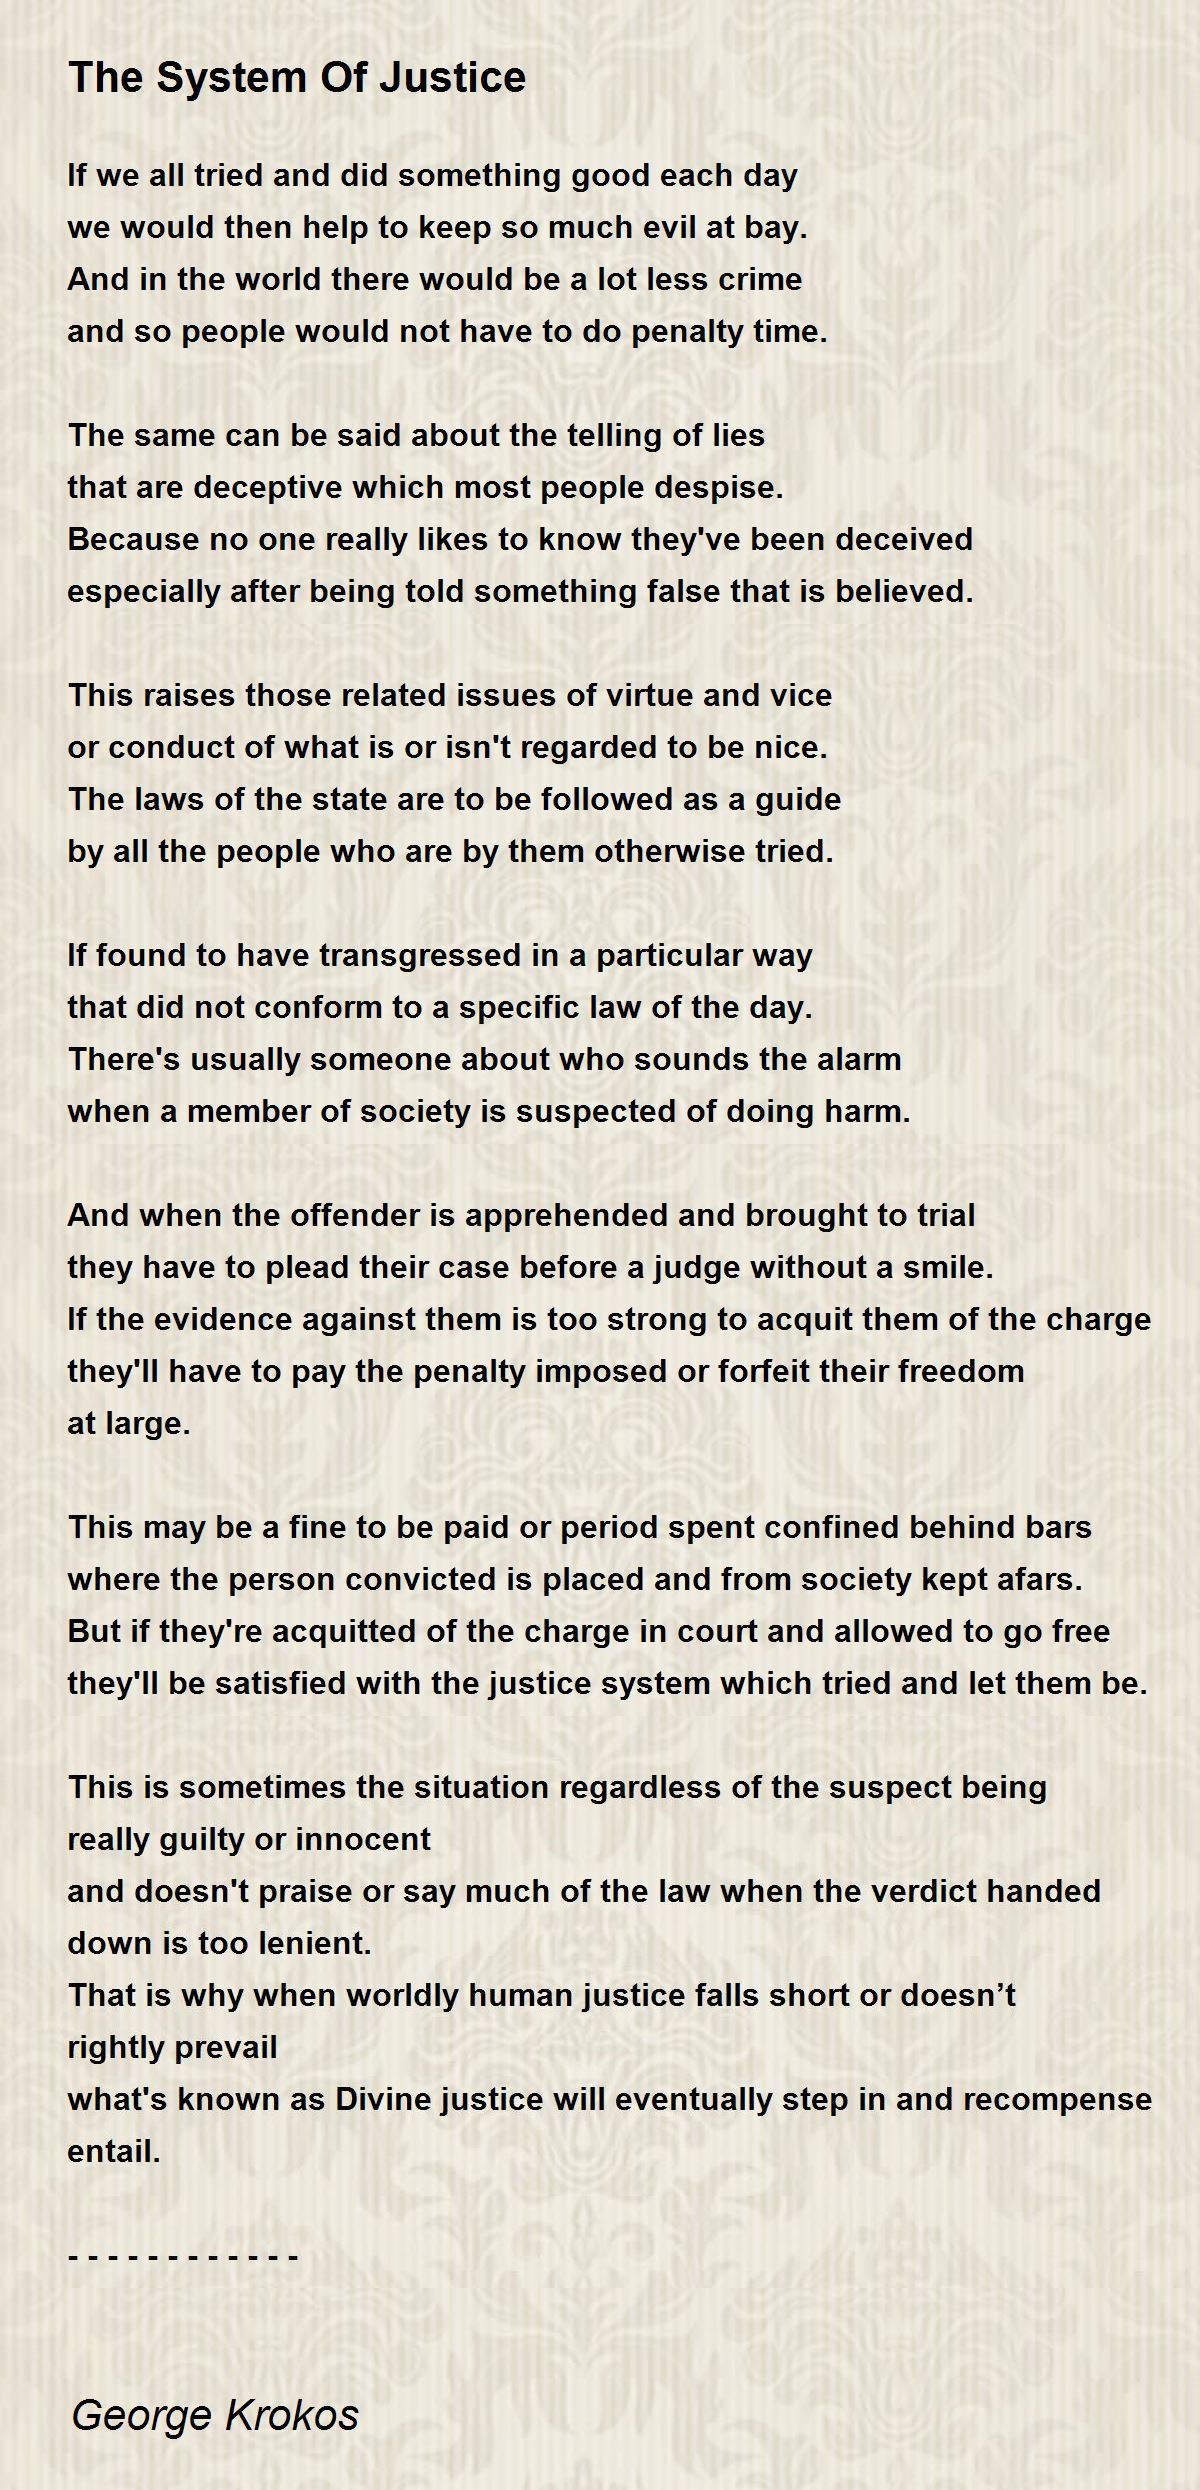 The System Of Justice By George Krokos The System Of Justice Poem